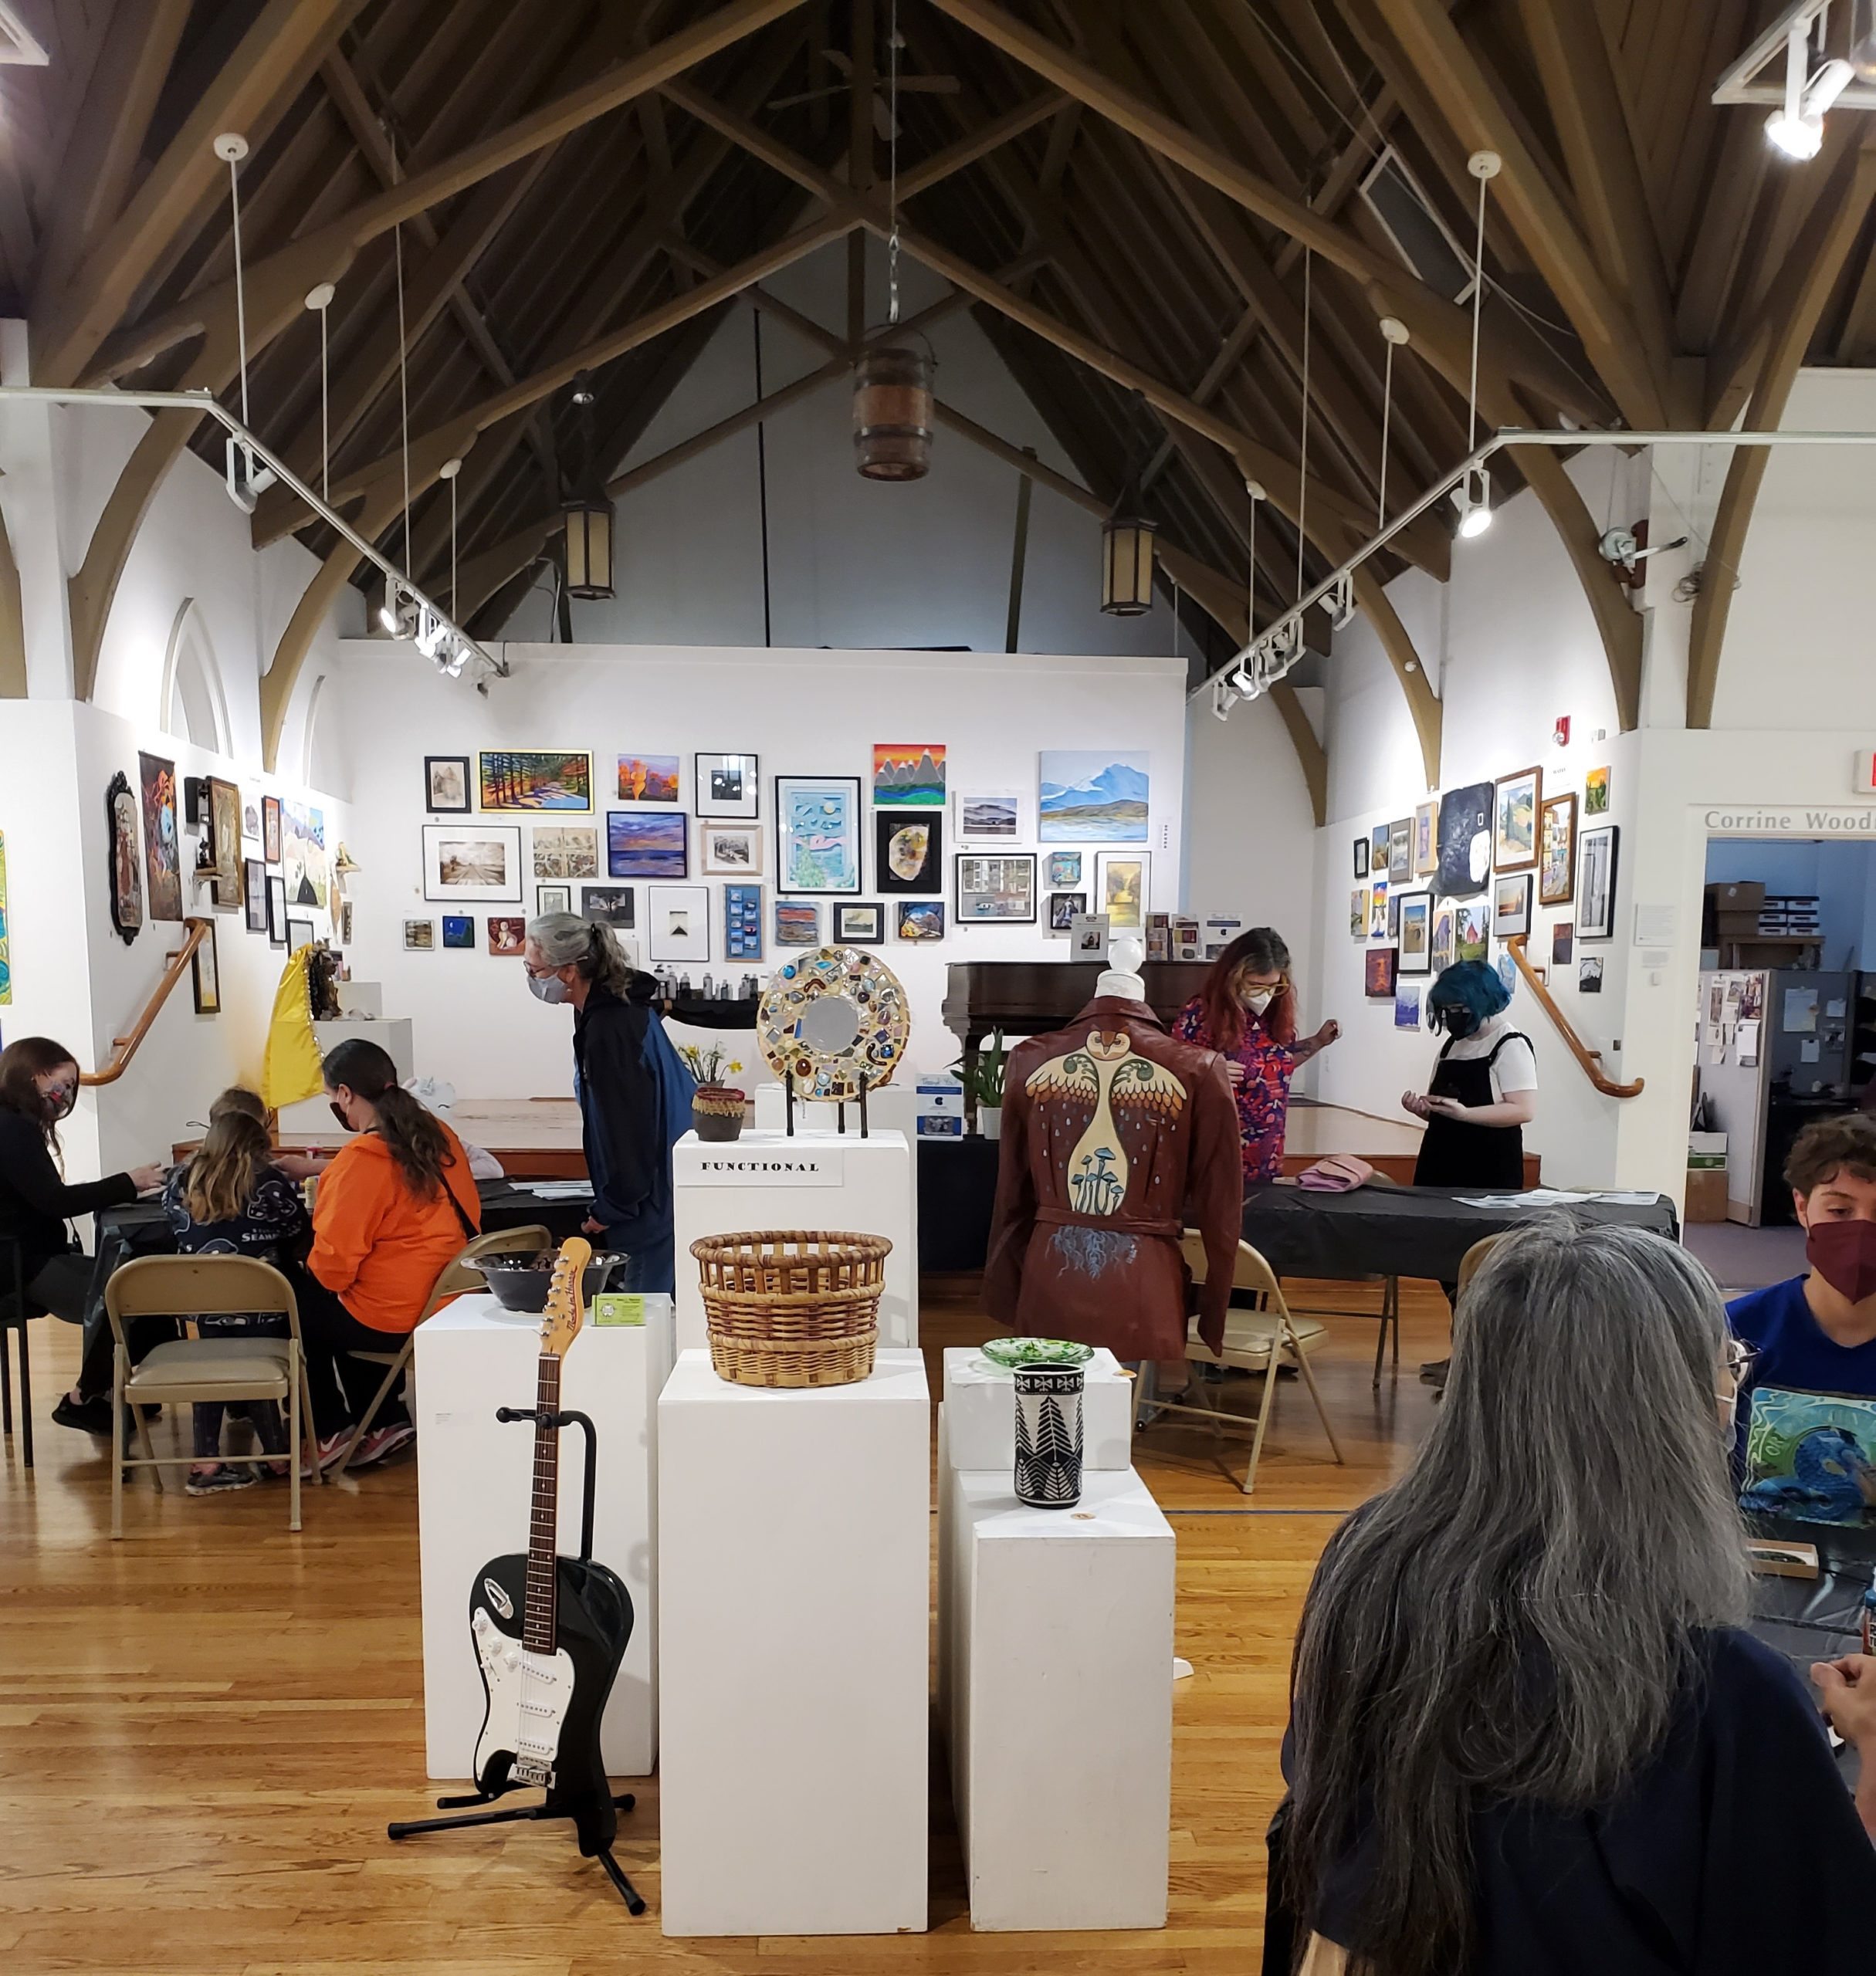 youth and adults making art together in The Arts Center main gallery with tall gothic ceiling